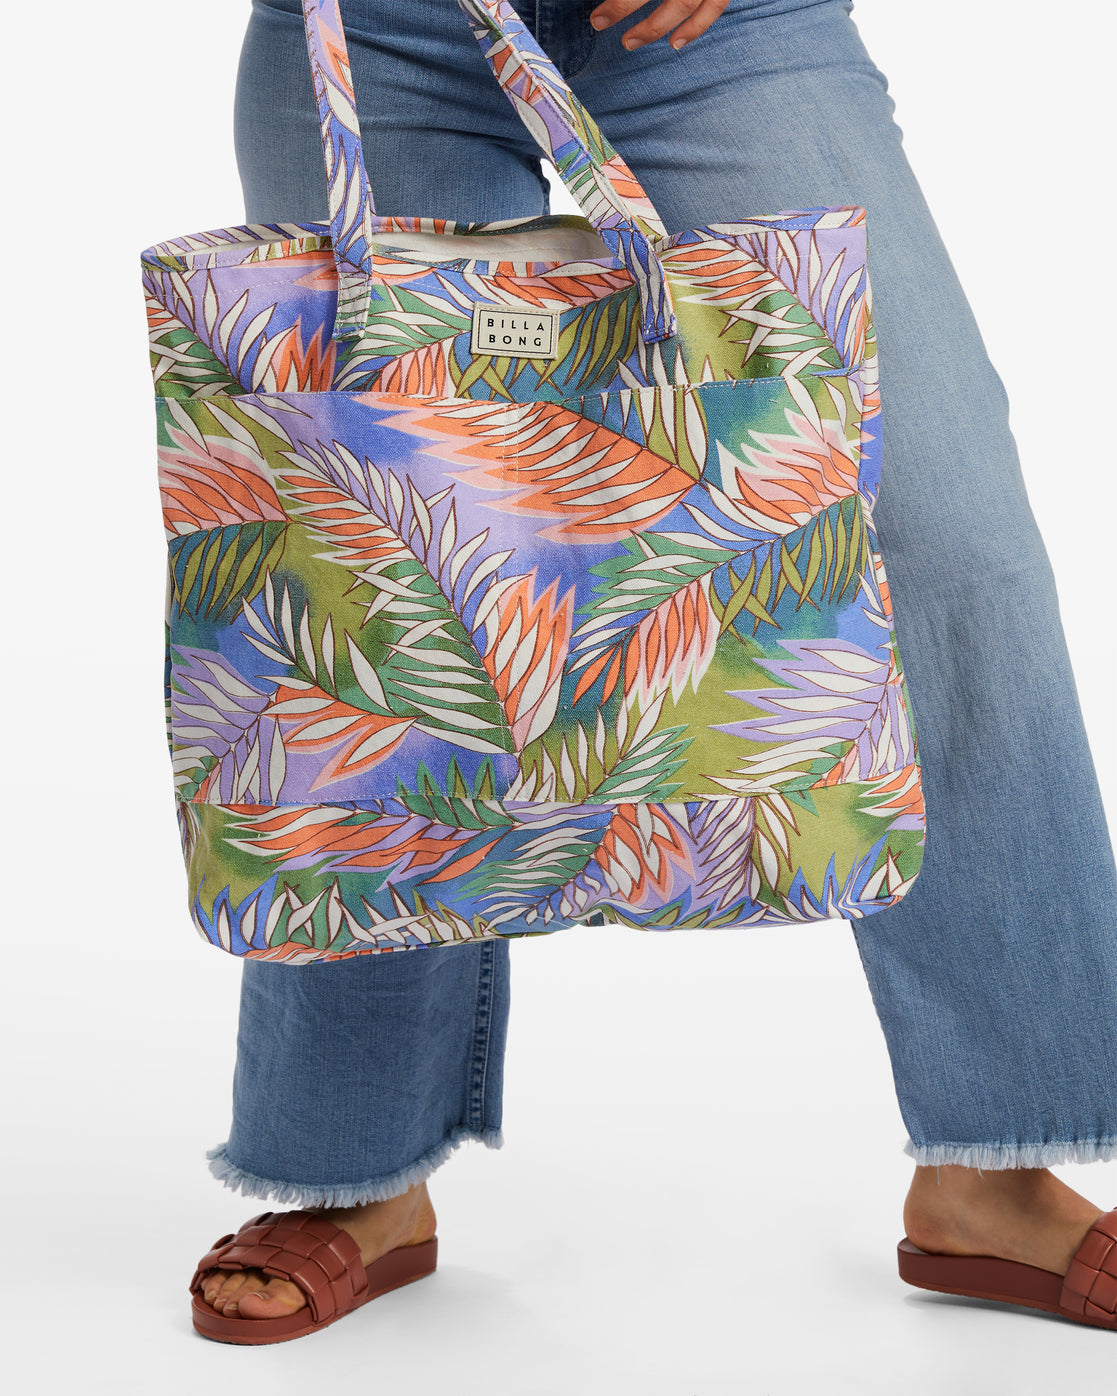 Carry On Tote Bag - Lilac Breeze – Billabong